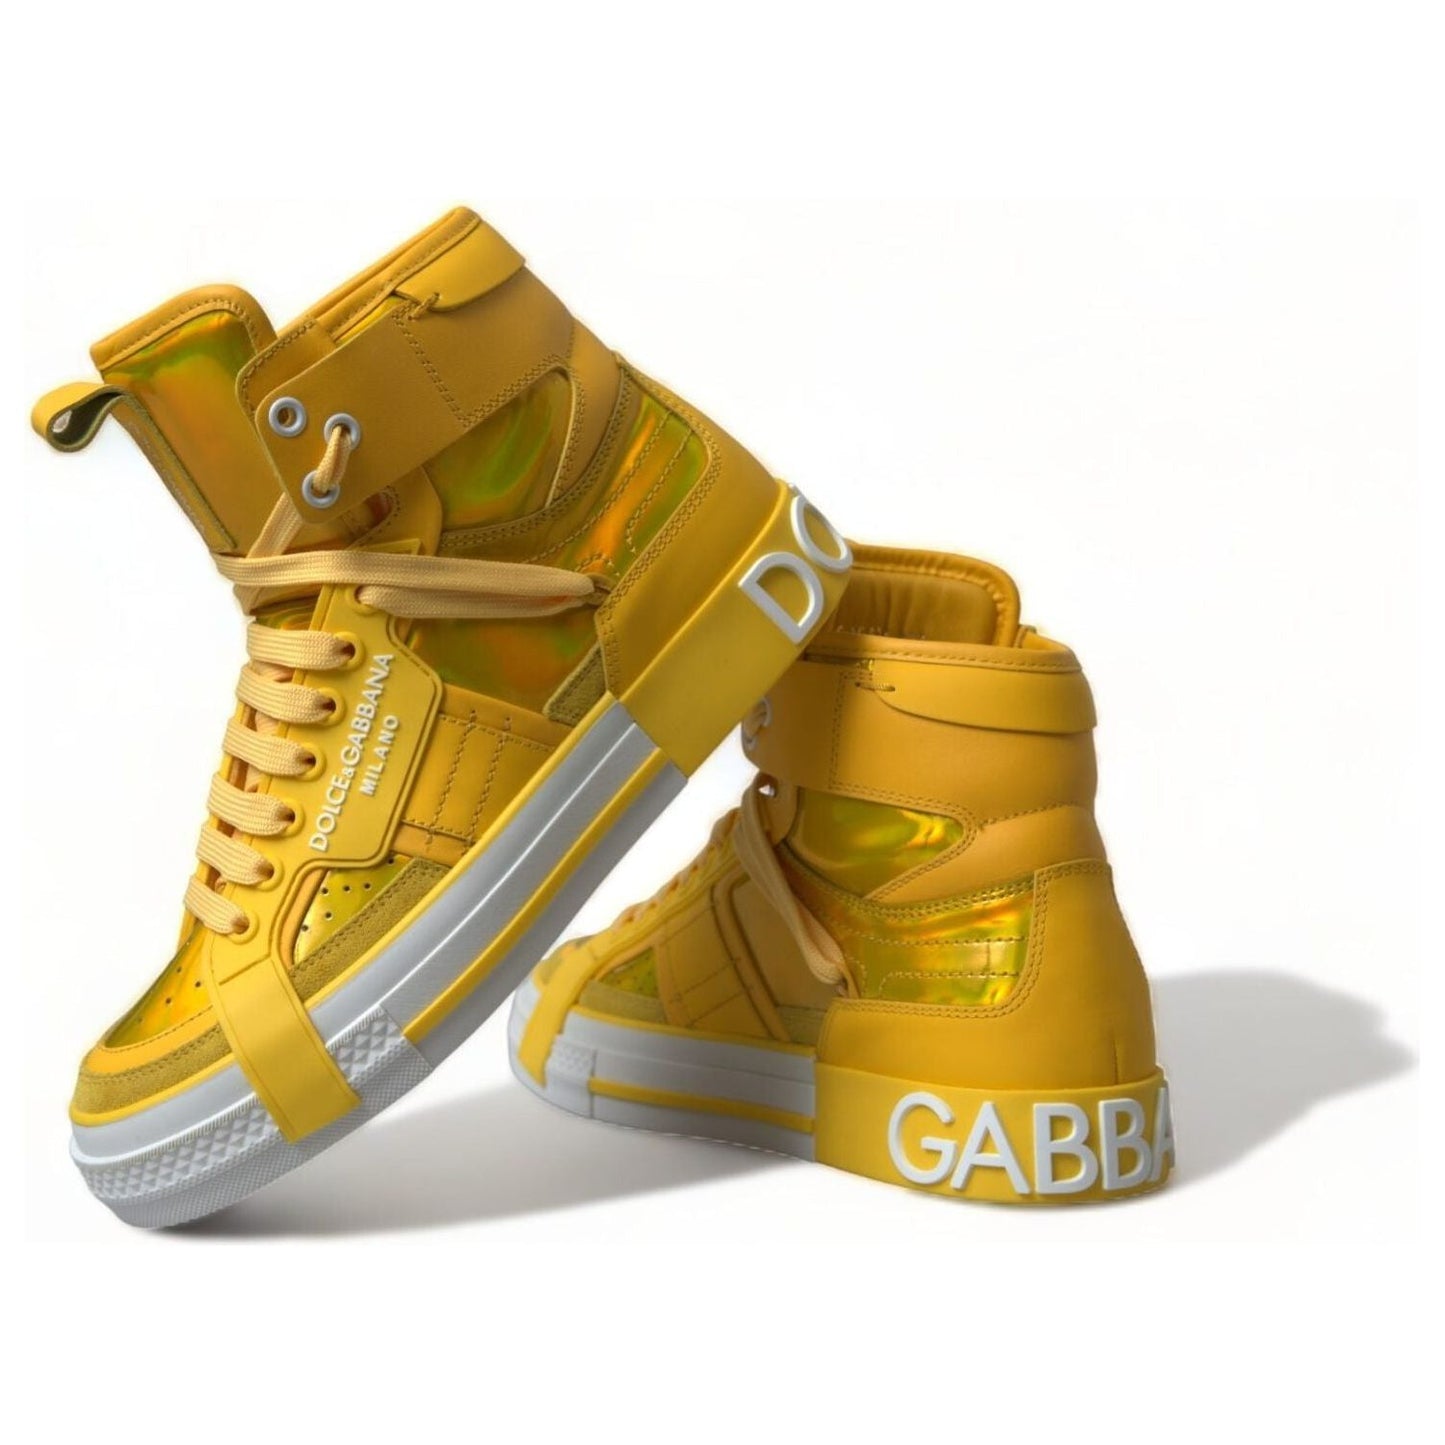 Dolce & Gabbana Chic High-Top Color-Block Sneakers yellow-white-leather-high-top-sneakers-shoes 465A2113-BG-scaled-e248af60-c32.jpg